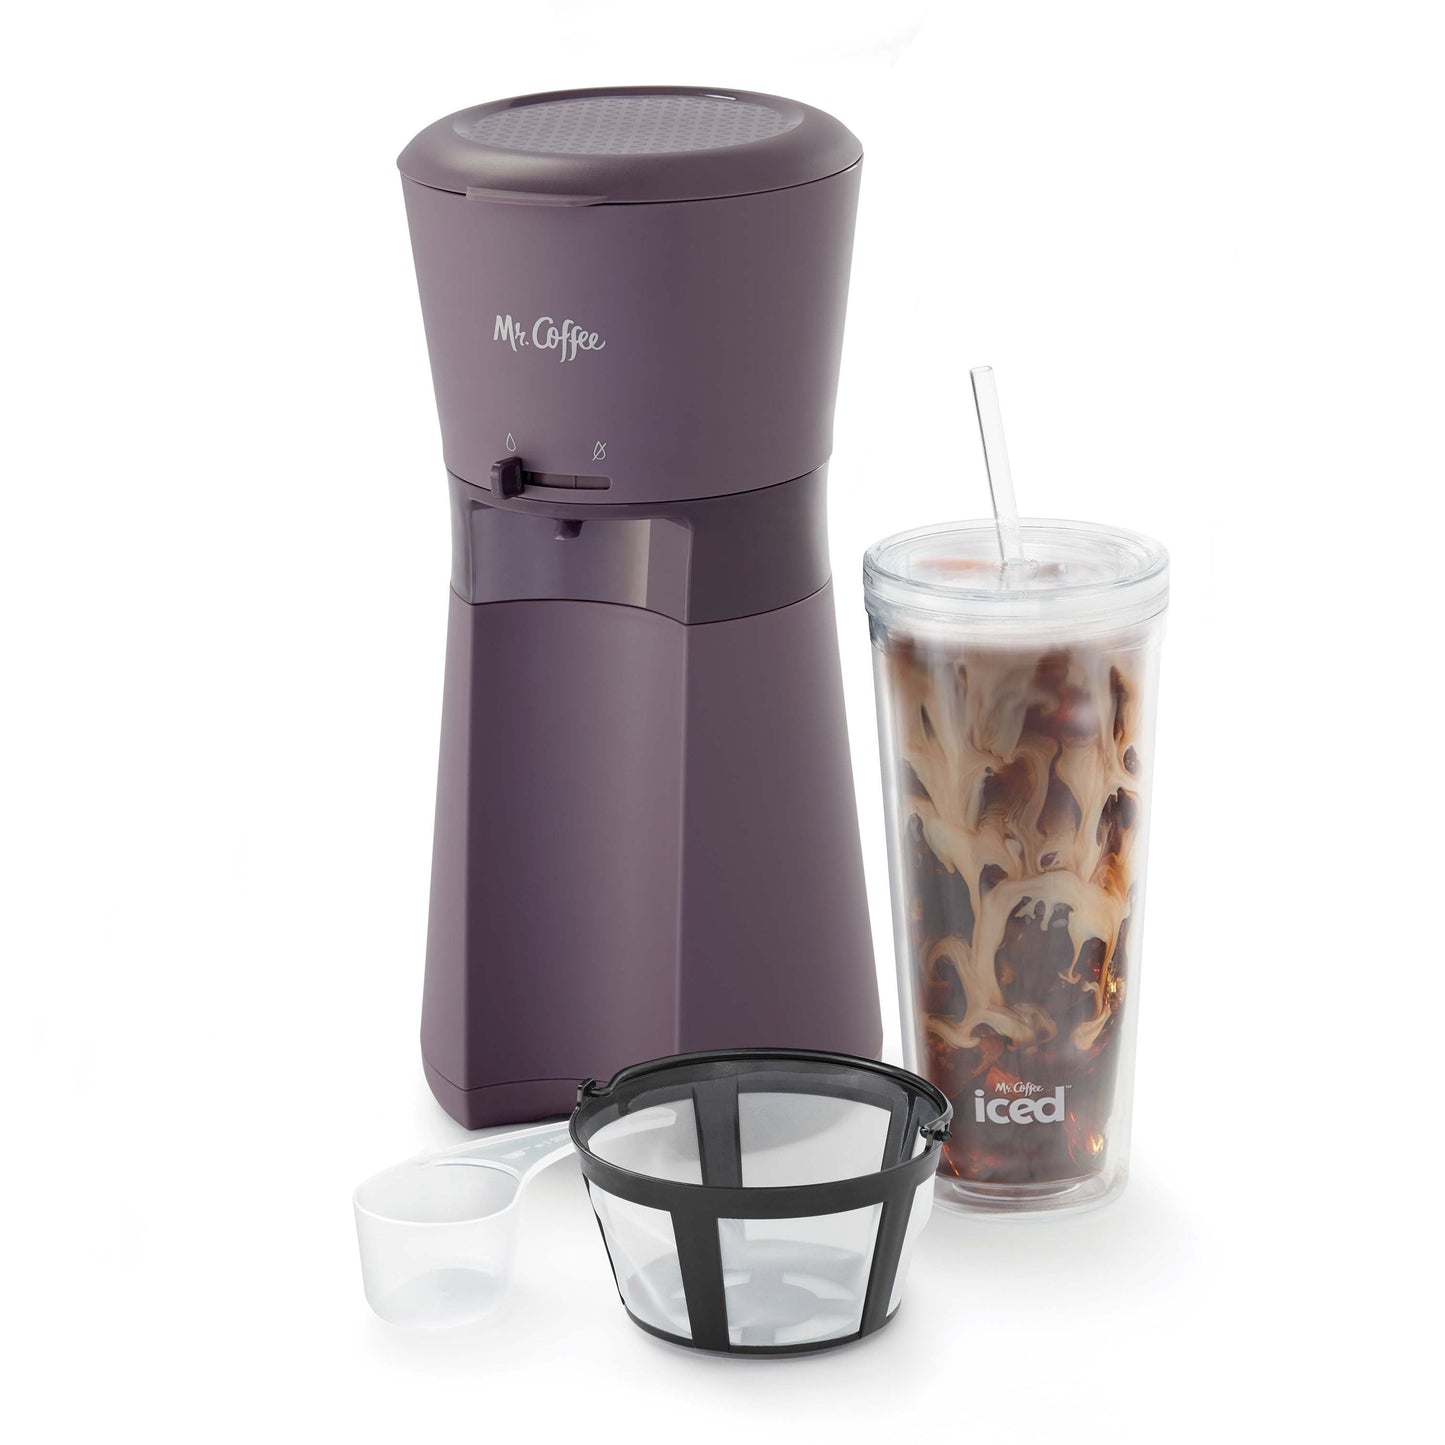 Mr. Coffee® Iced™ Coffee Maker with Reusable Tumbler and Coffee Filter, Lavender